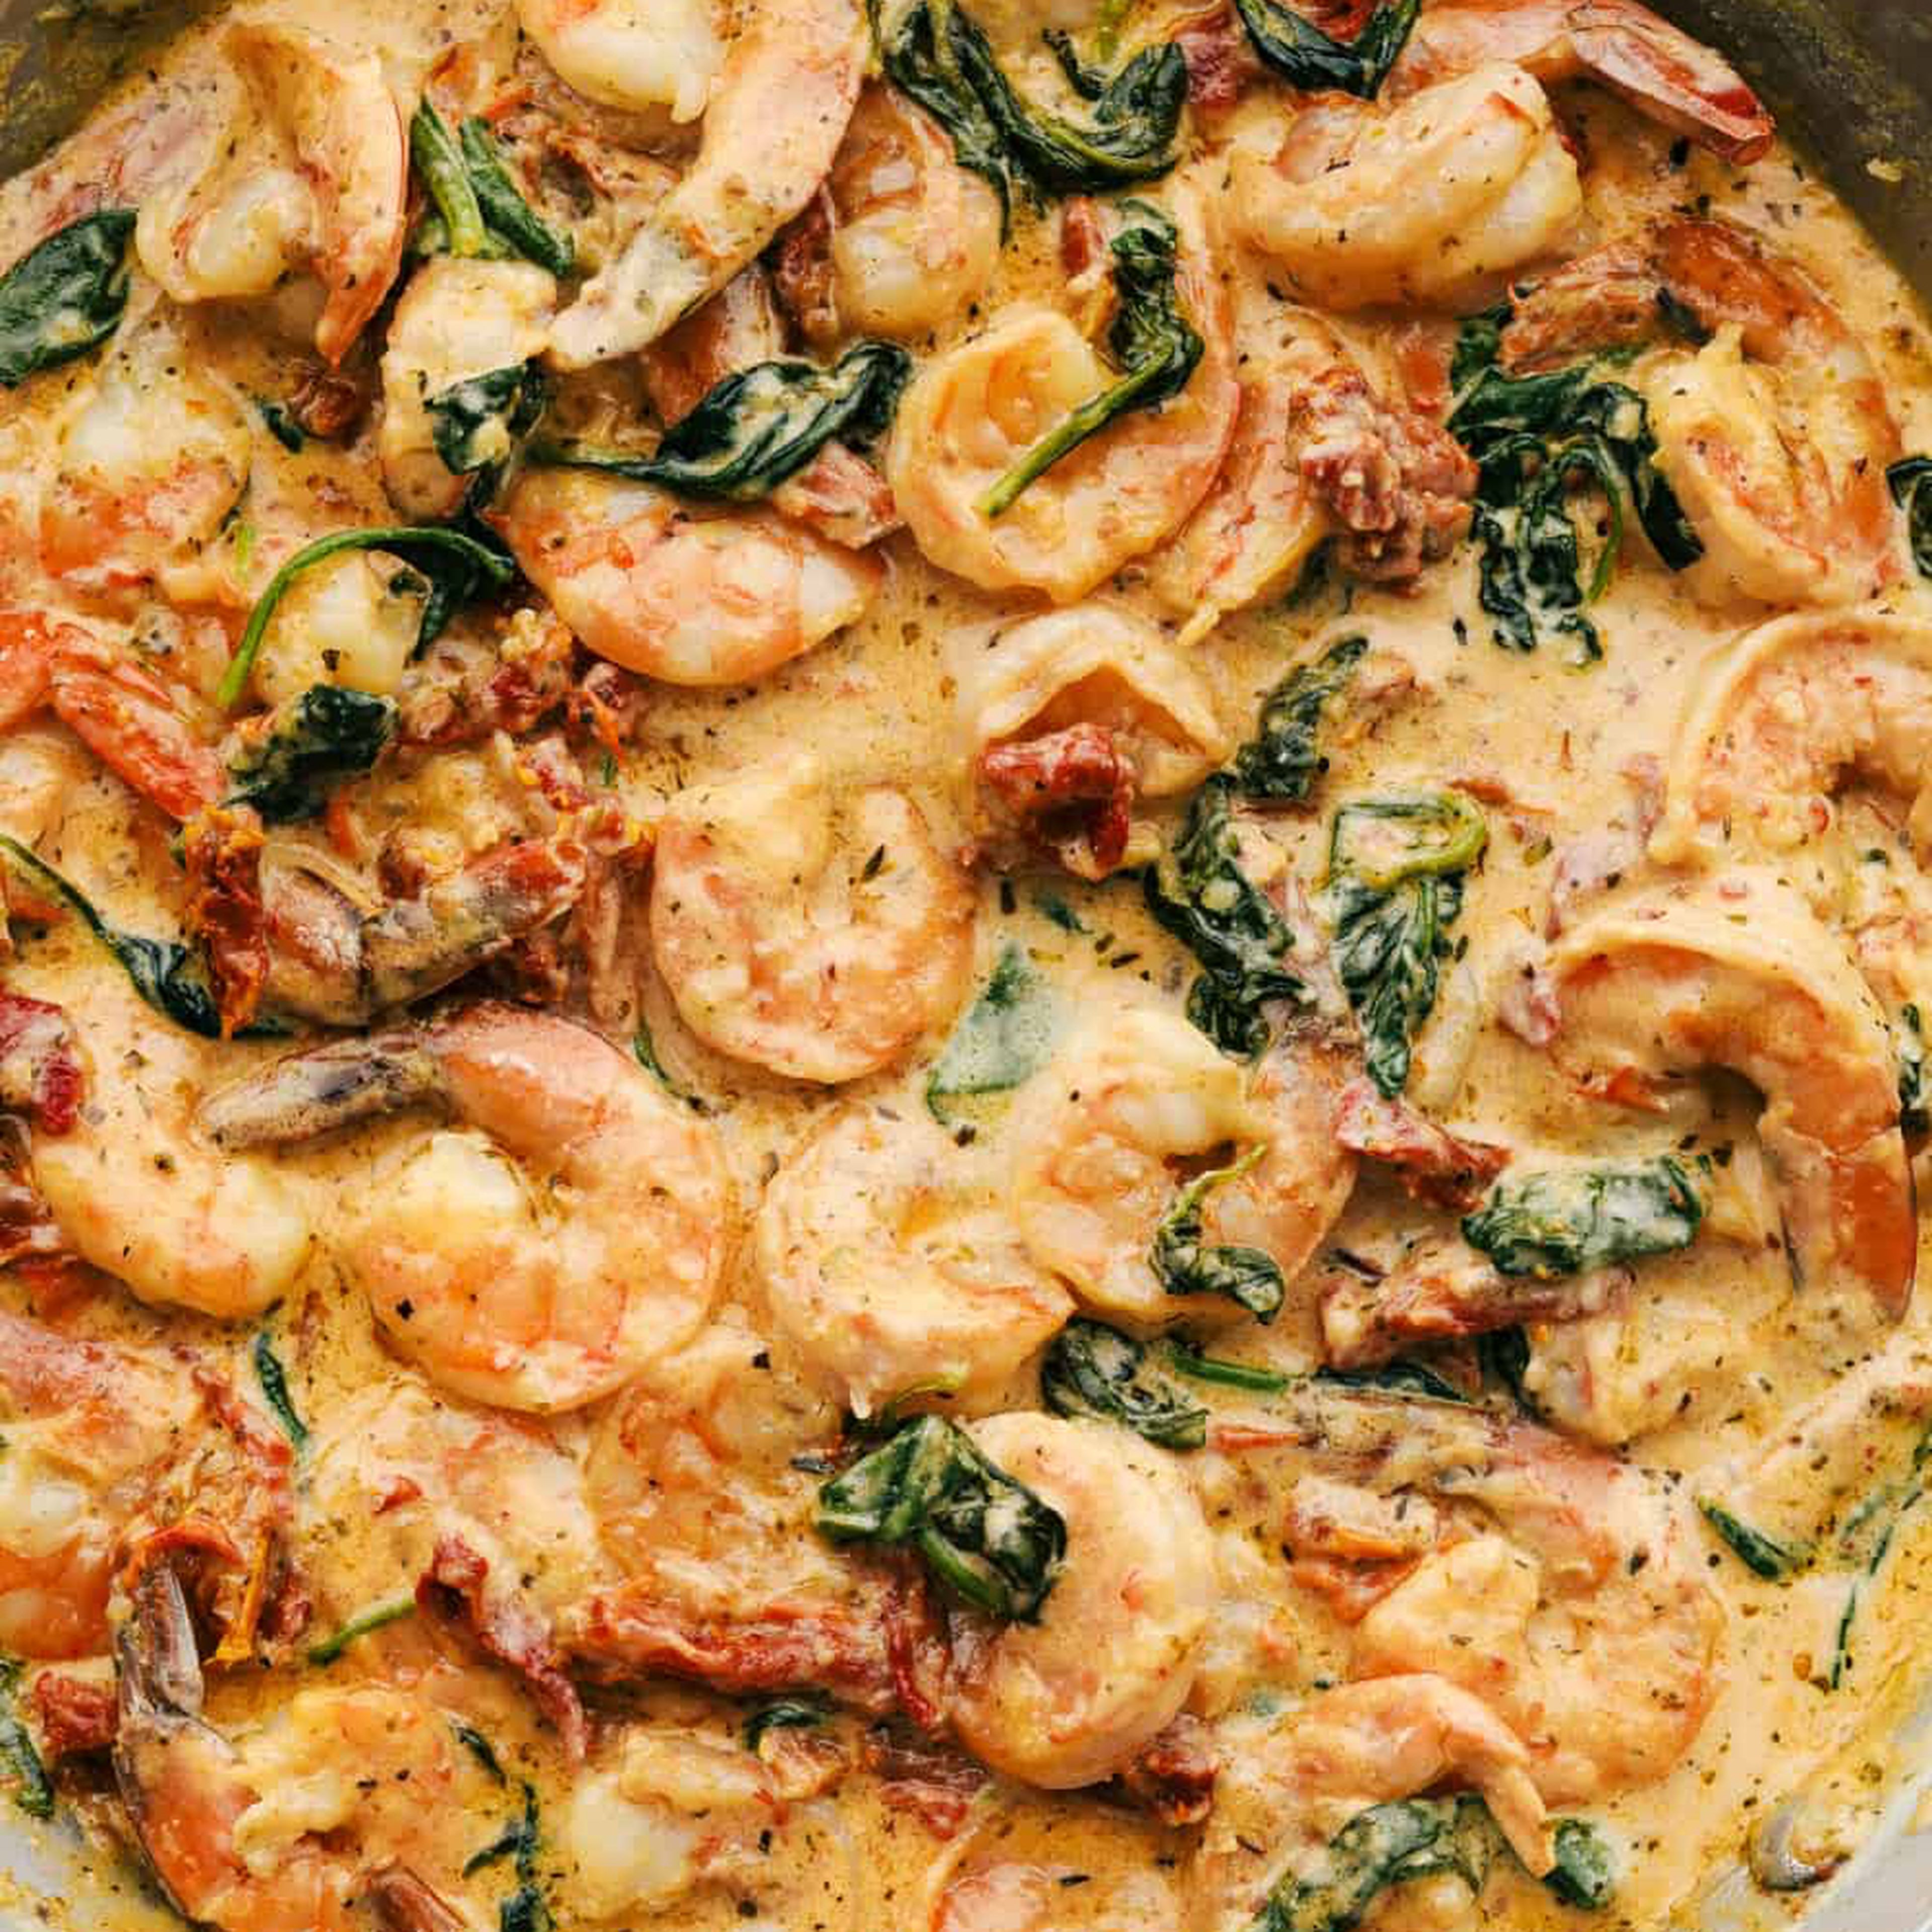 Tuscan Shrimp with spinach & tomatoes